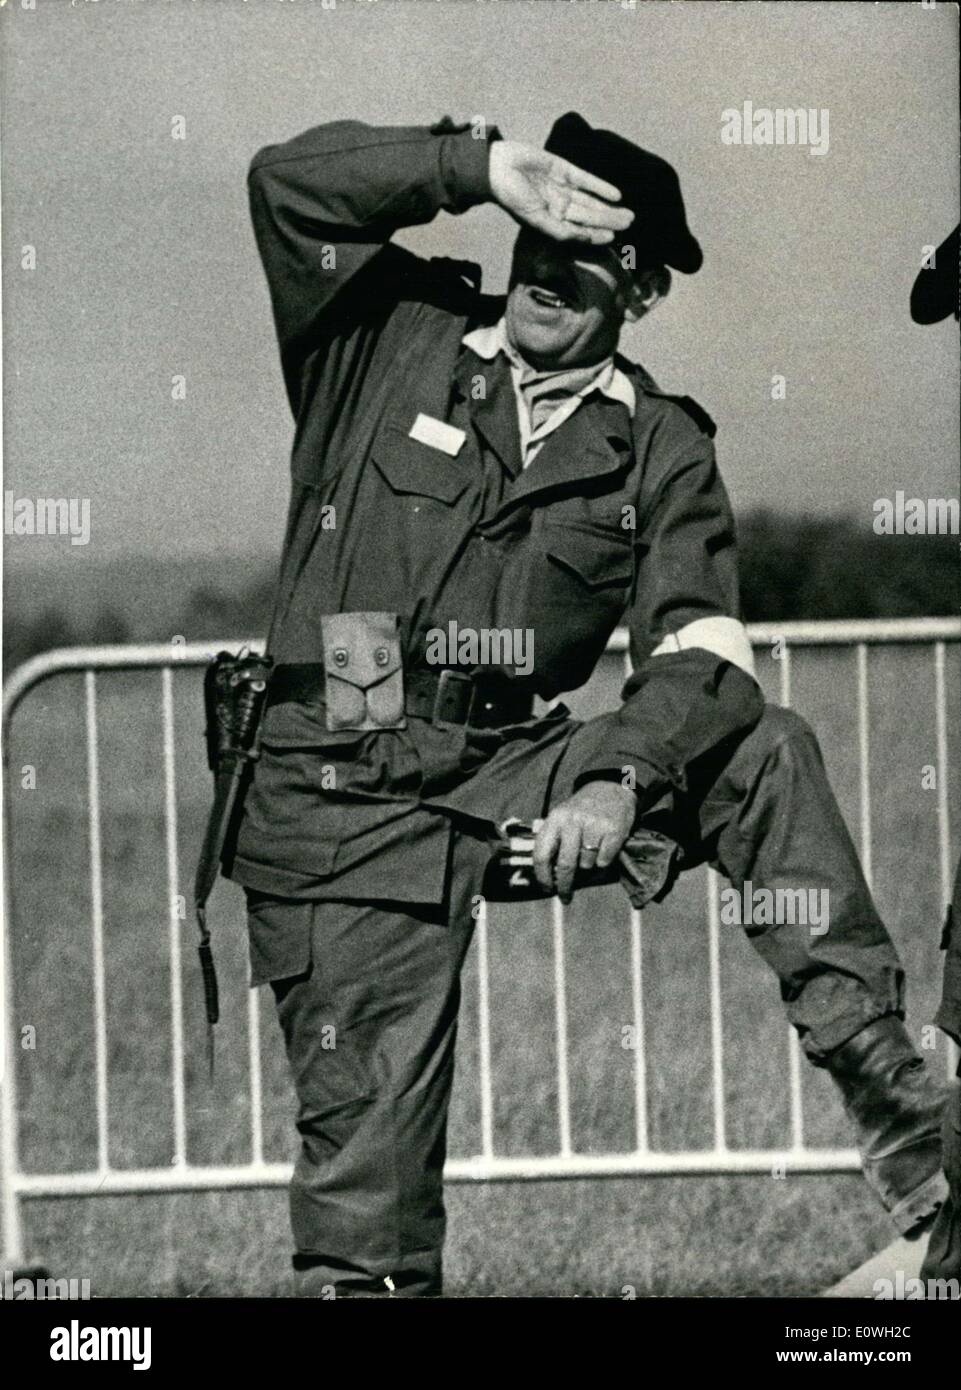 Oct. 06, 1962 - General Massu directing the ''Haricot de Vadenay'' battalion during their maneuvers for General de Gaulle. Stock Photo